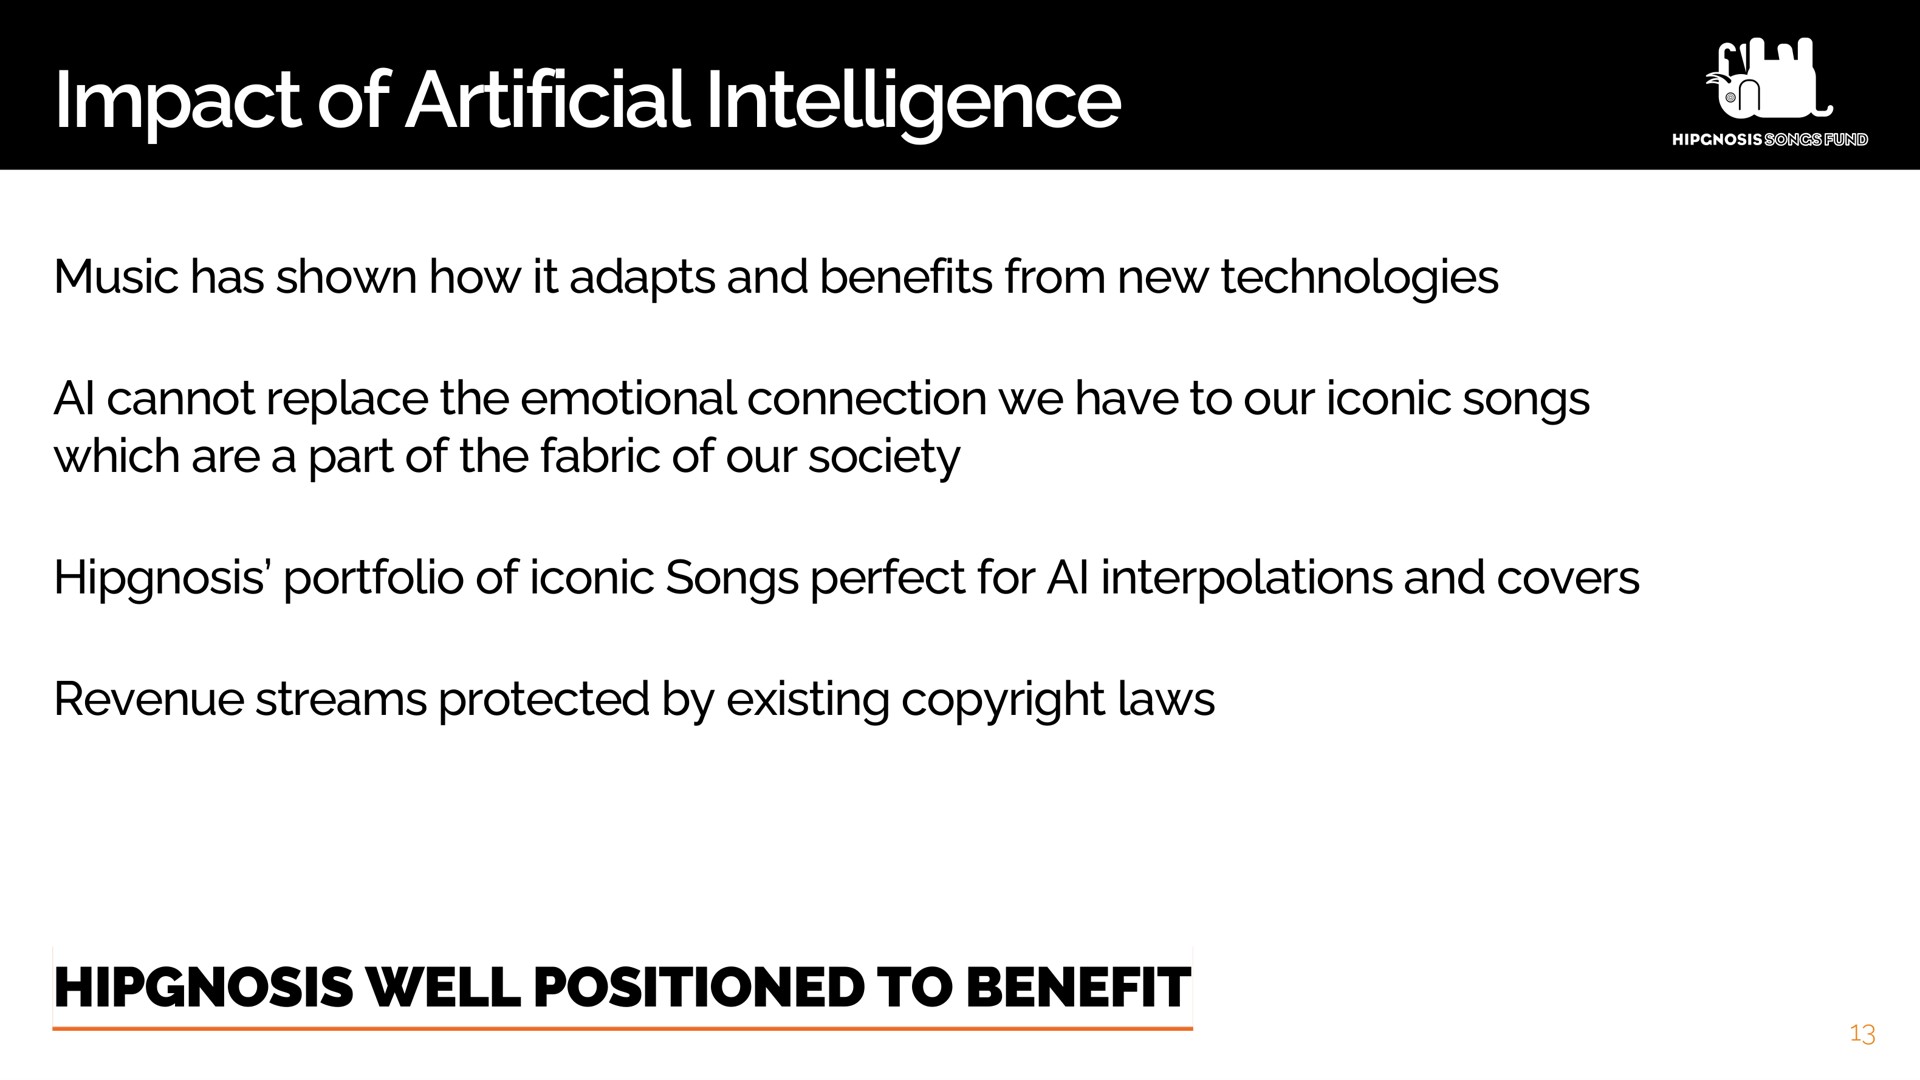 impact of artificial intelligence well positioned to benefit | Hipgnosis Songs Fund